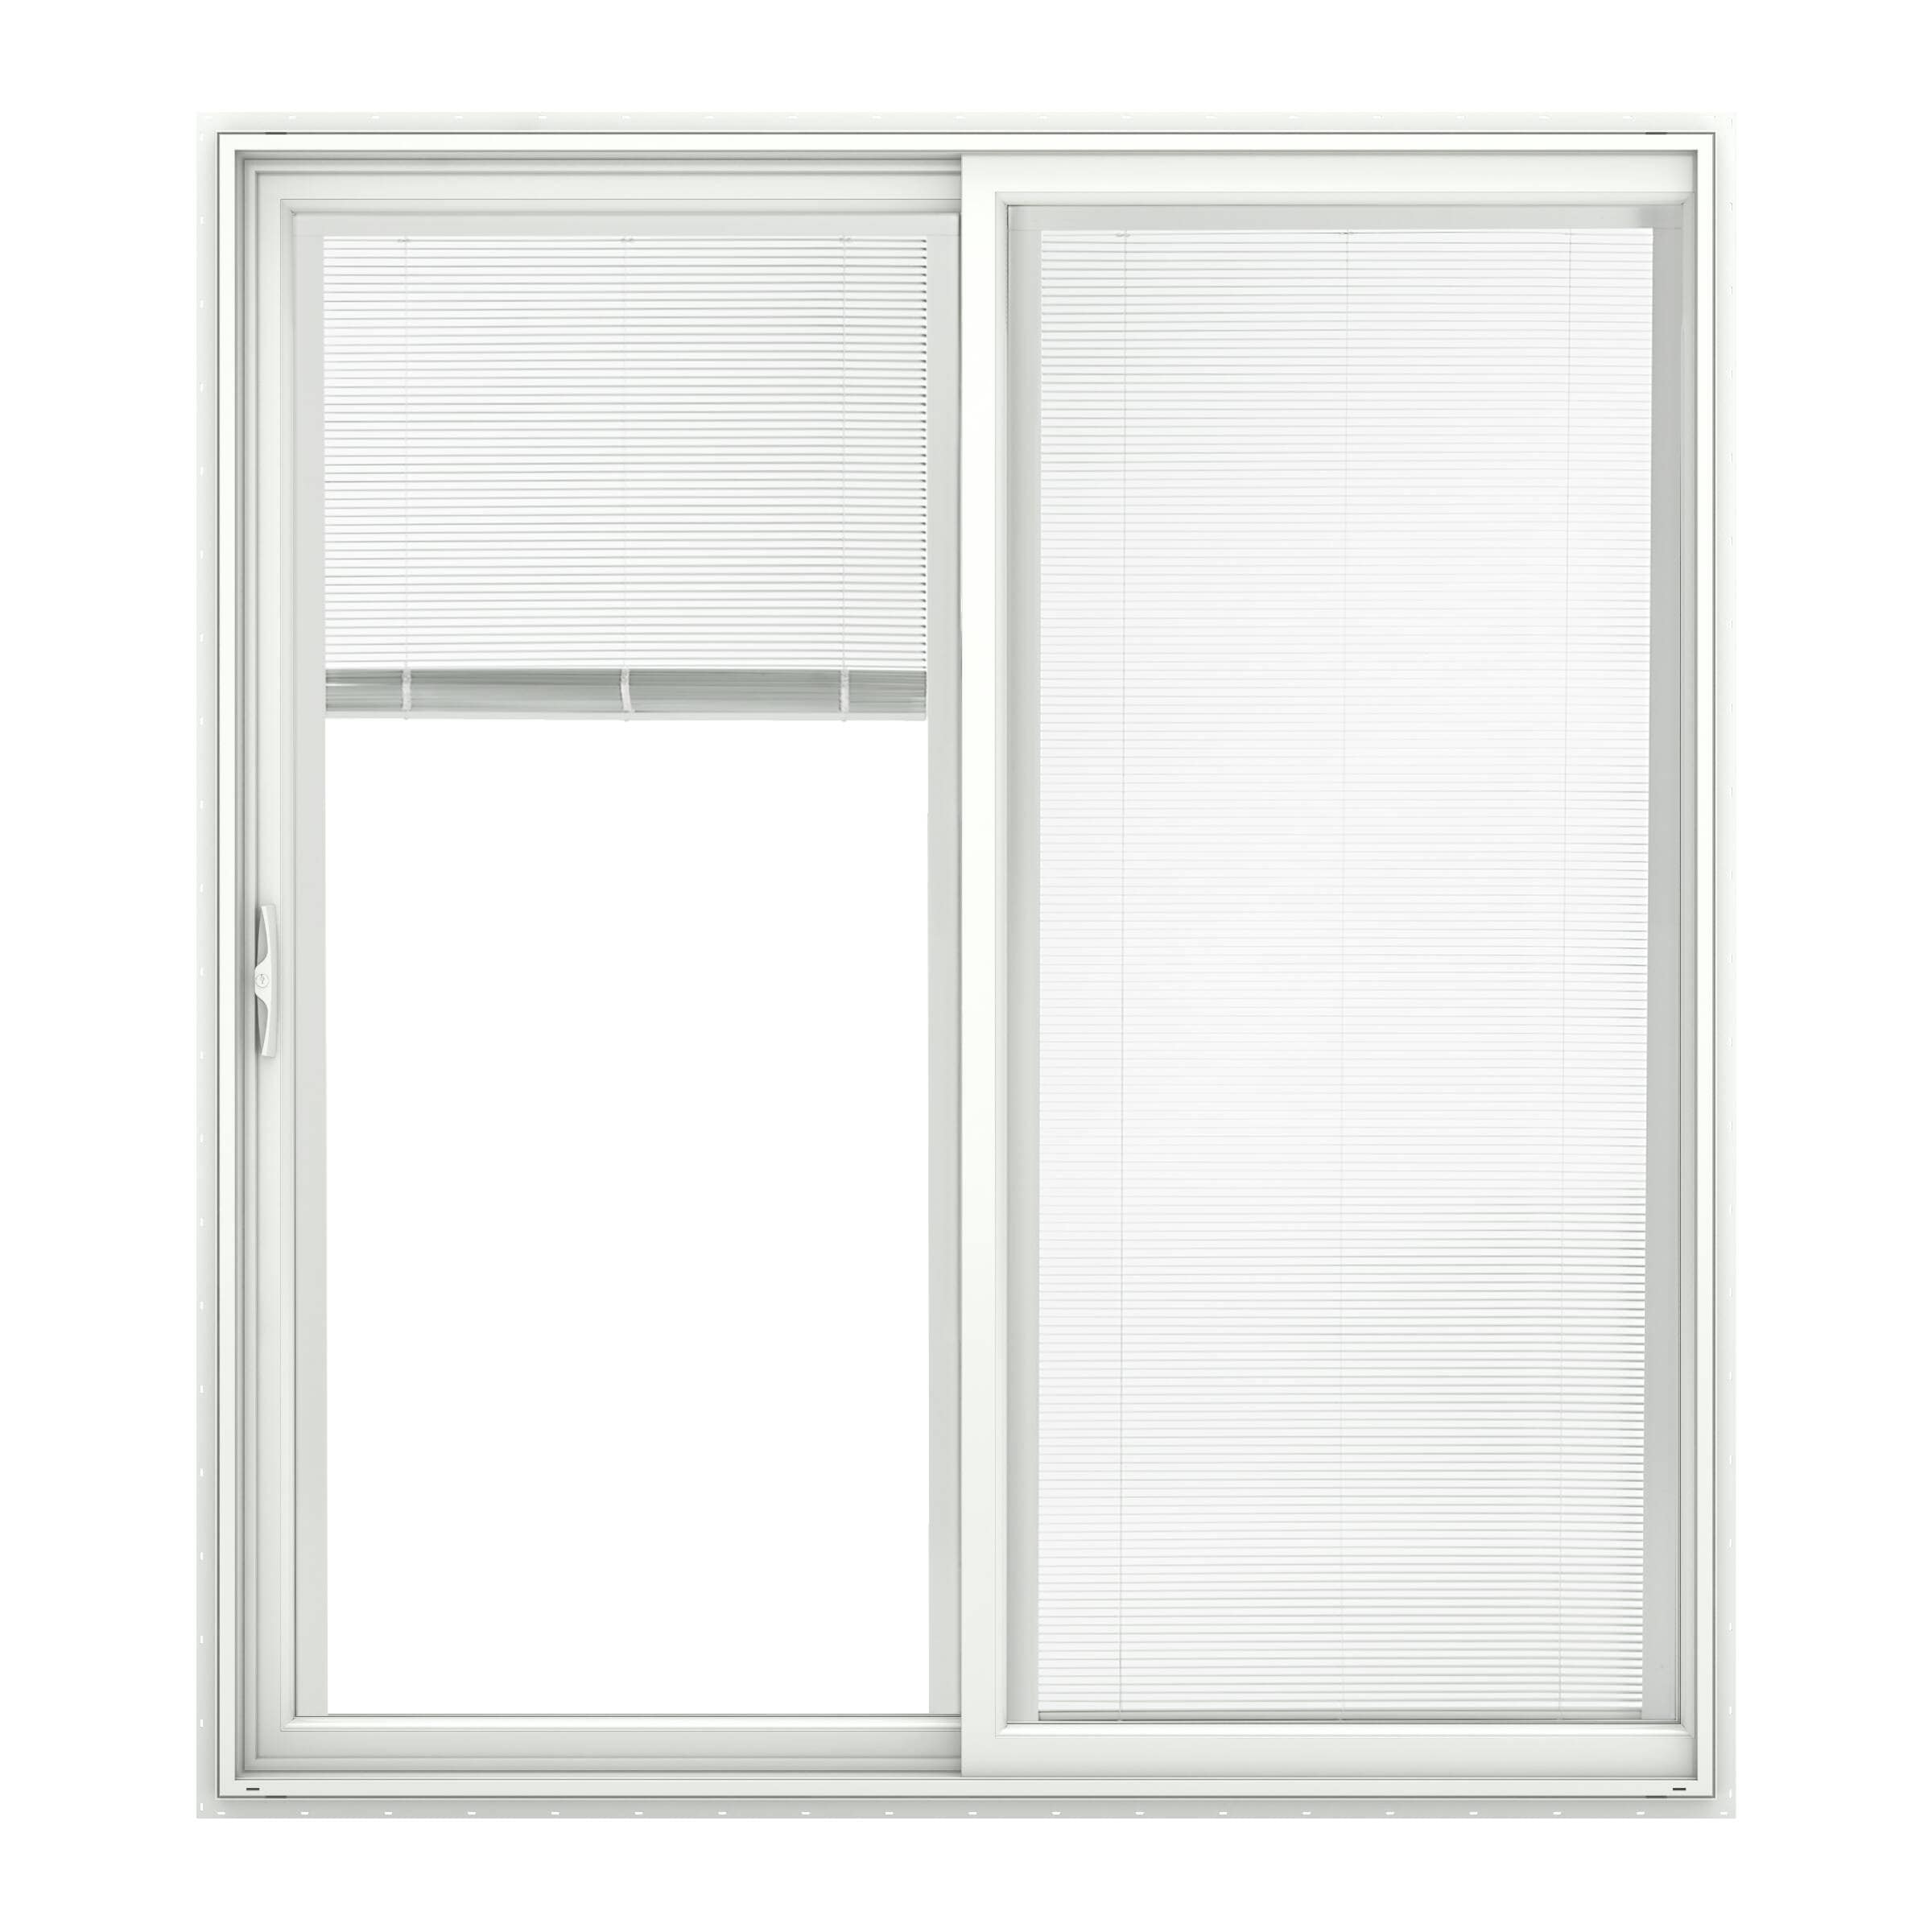 150 Series West 60-in x 80-in Low-e Blinds Between The Glass White Vinyl Sliding Right-Hand Sliding Double Patio Door | - Pella 1000010242